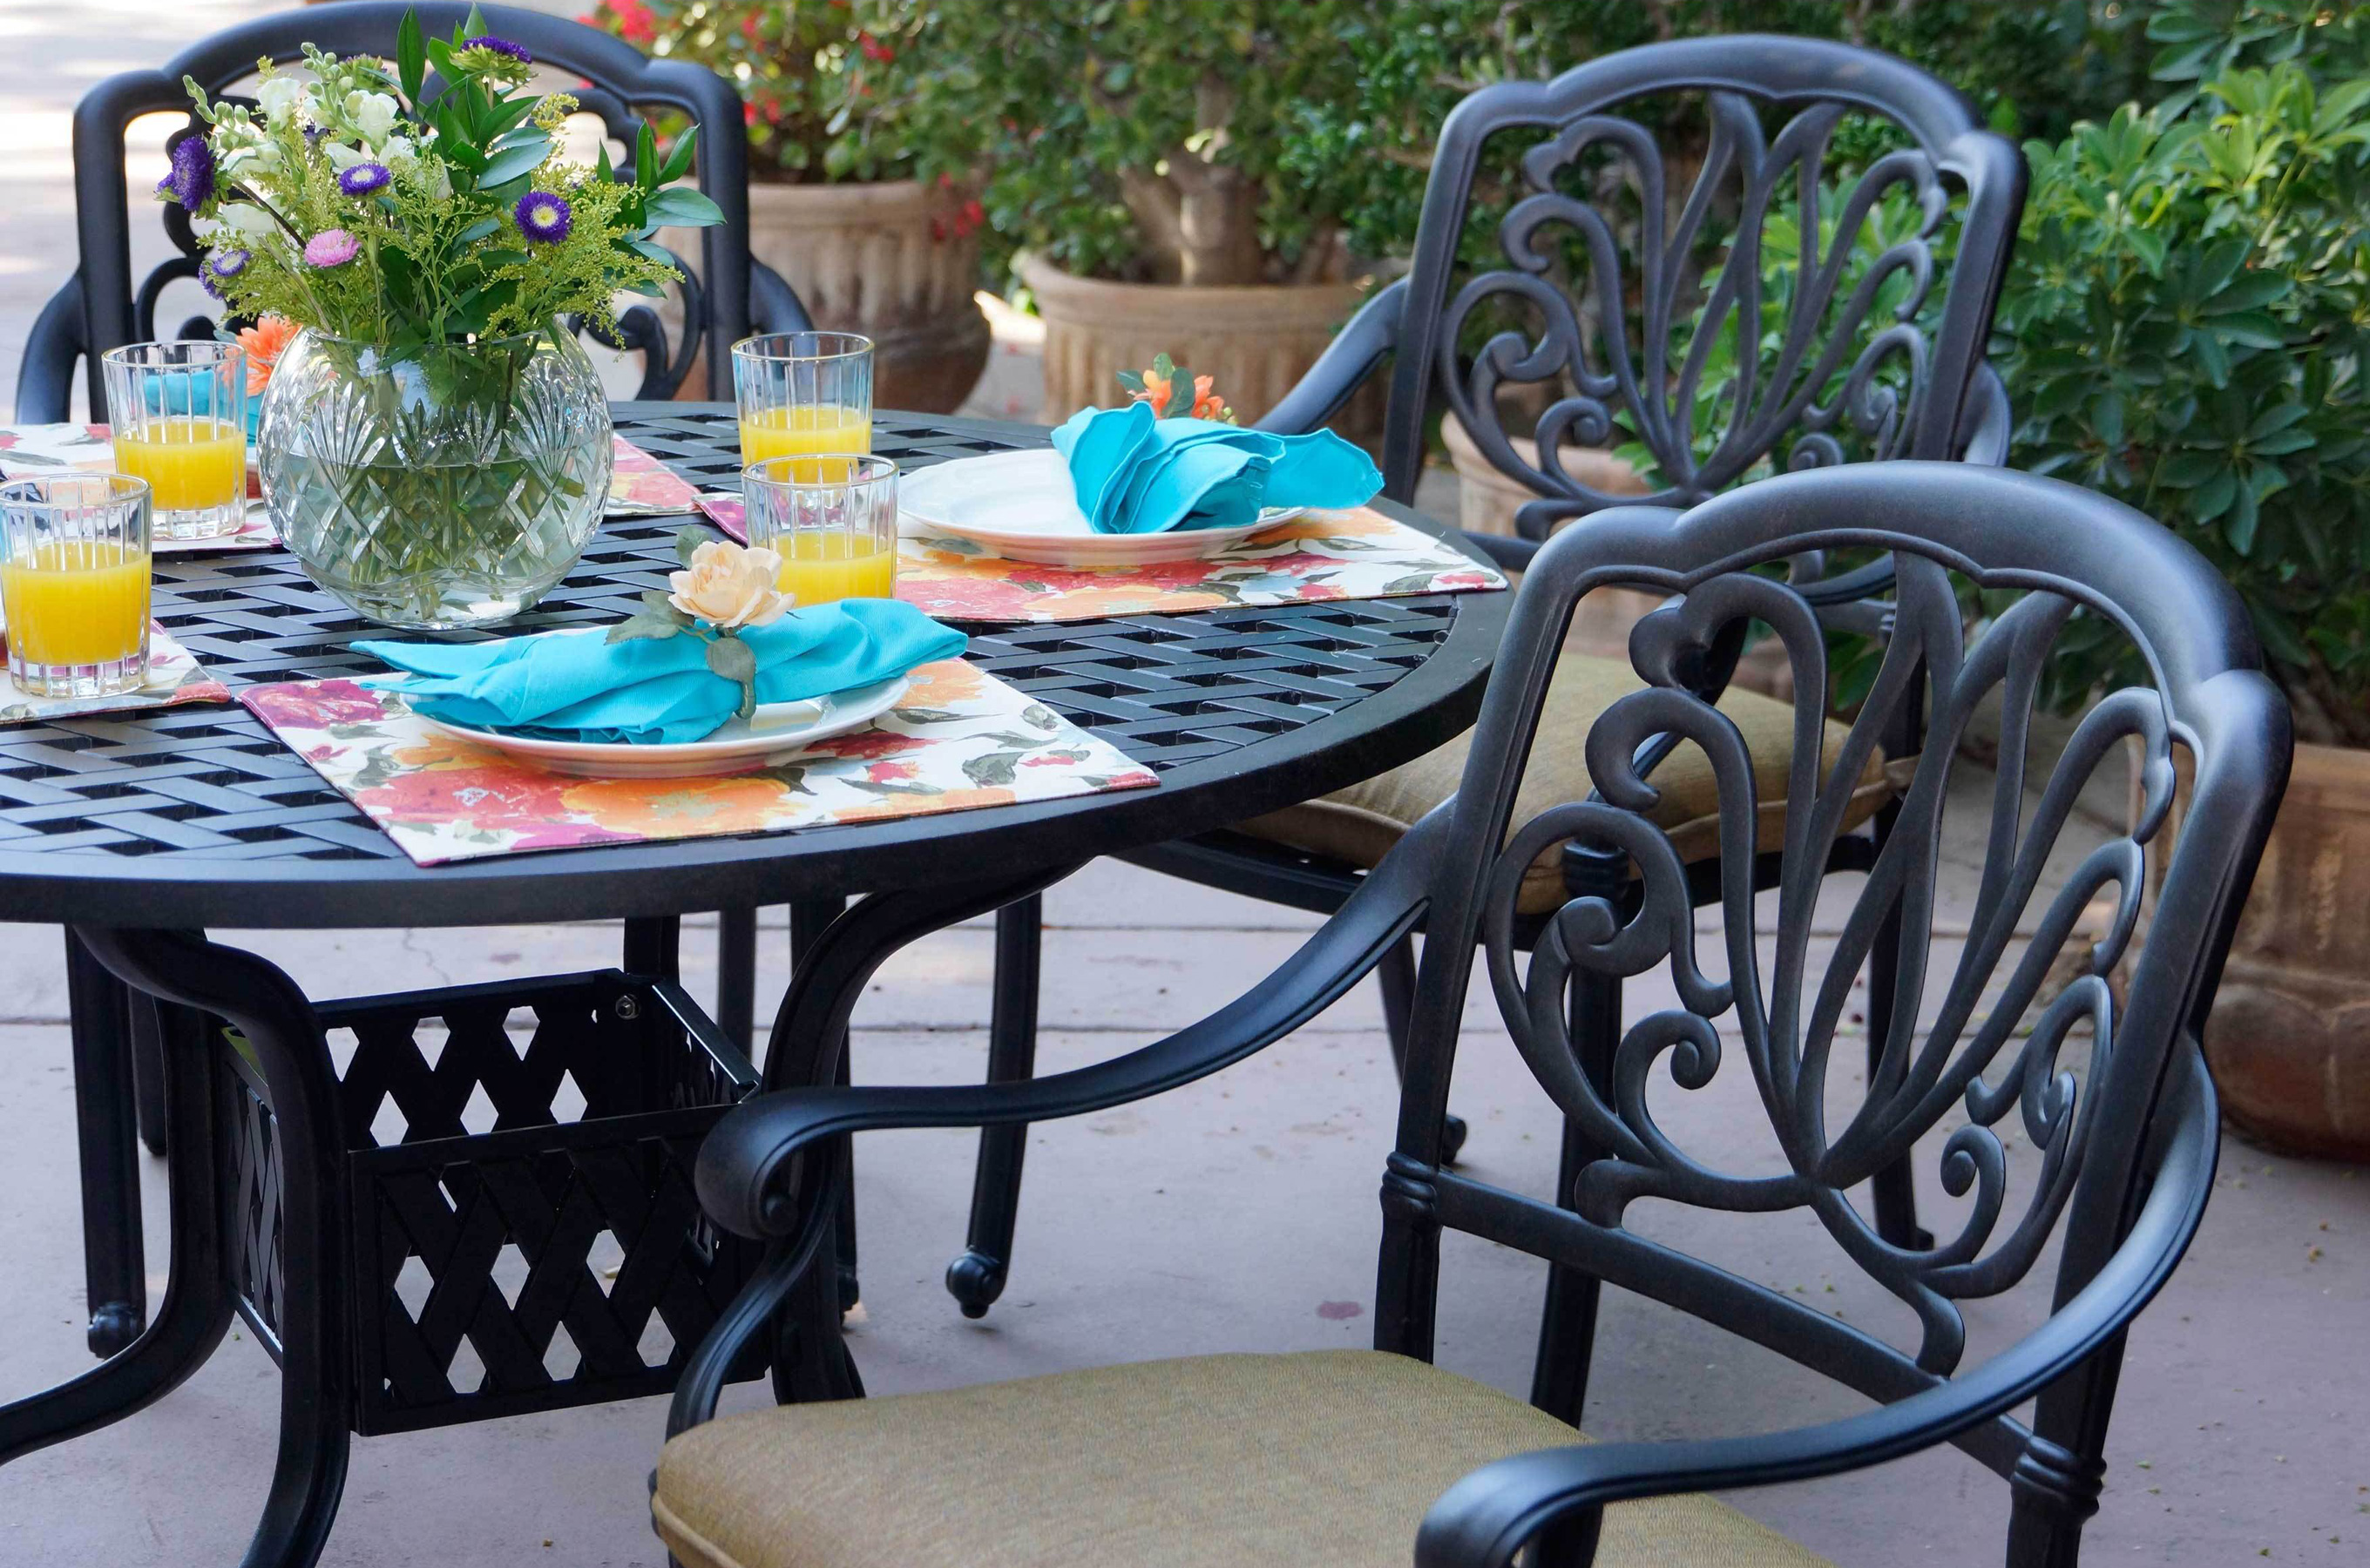 Patio Furniture Refinishing Services, How To Fix Cast Iron Patio Furniture